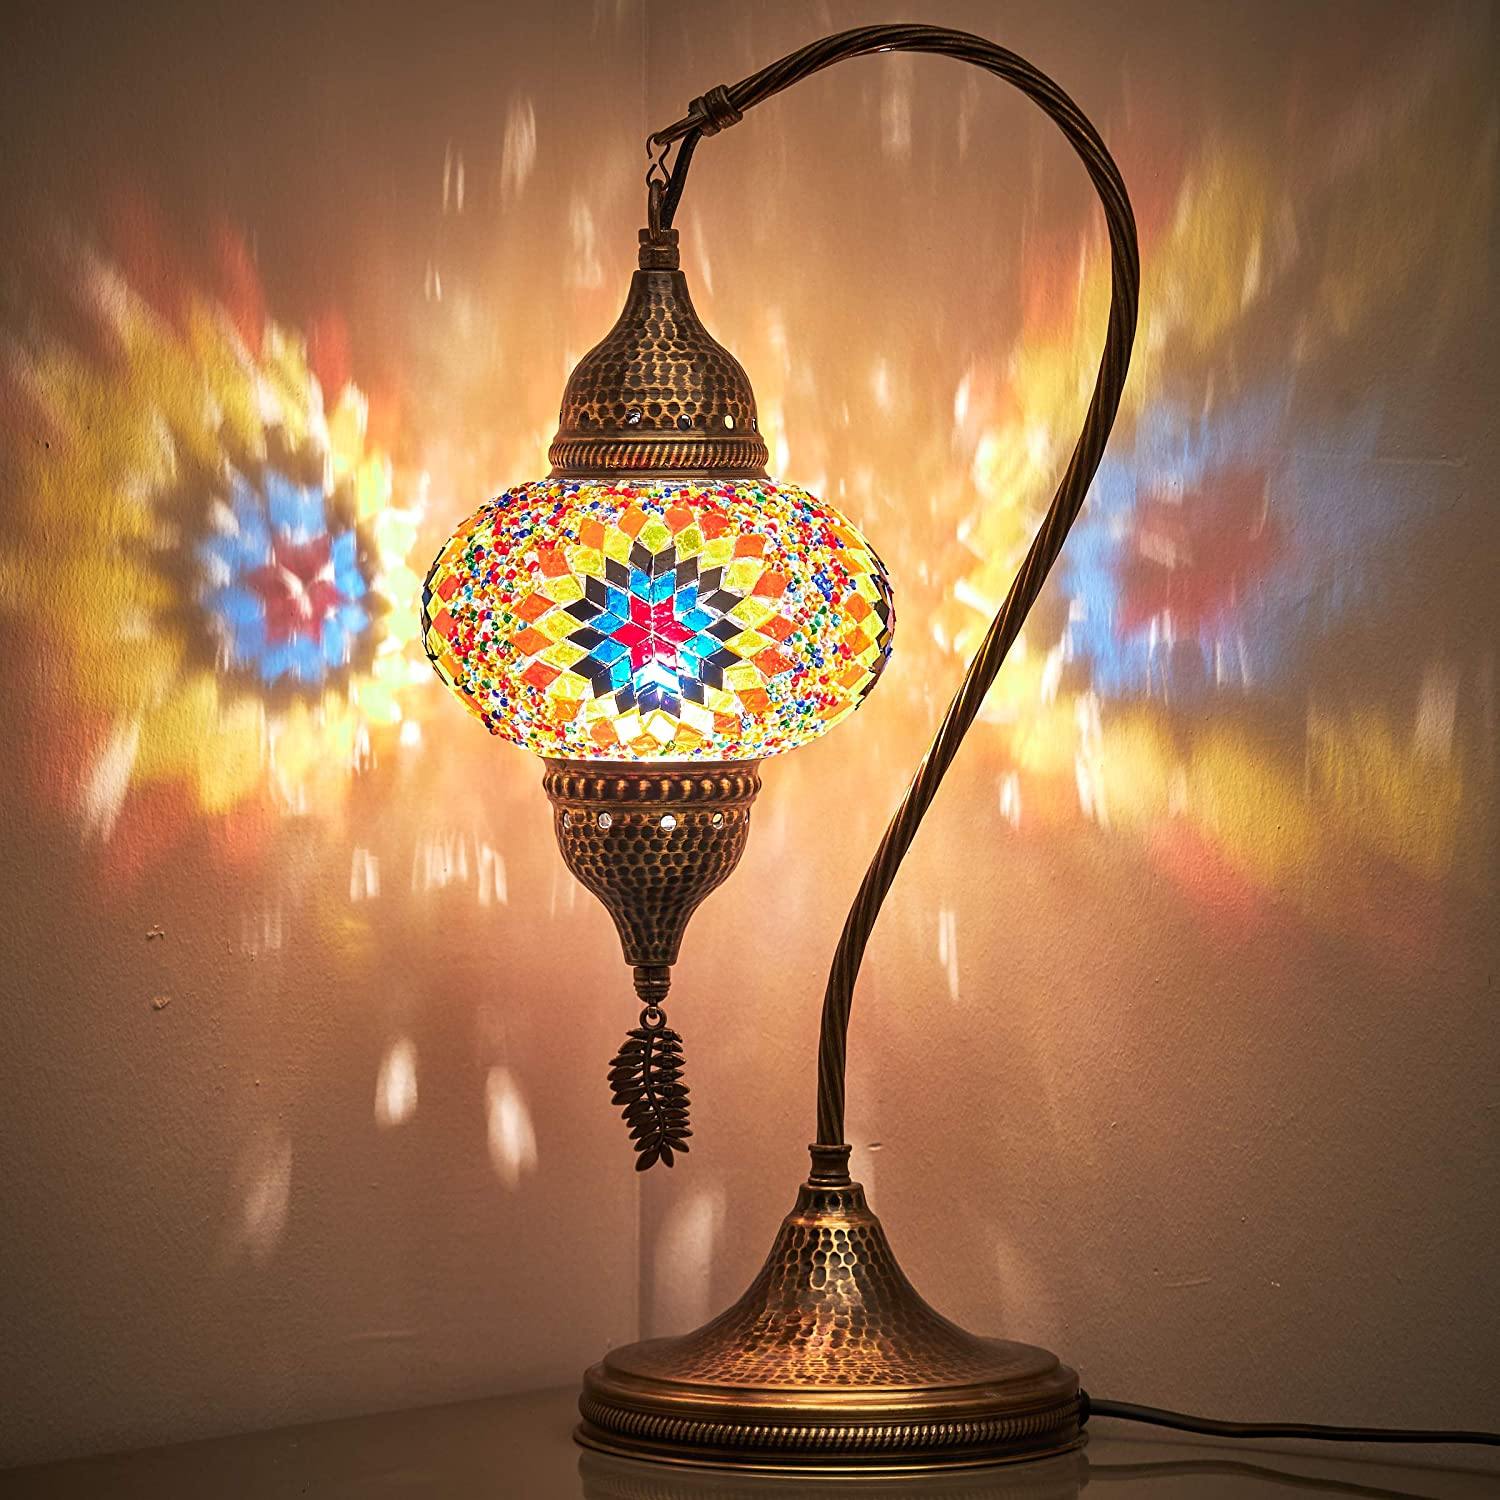 HANDMADE MOSAIC NEW SWAN NECK LAMP (FREE AND FAST EXPEDITED 5 DAY